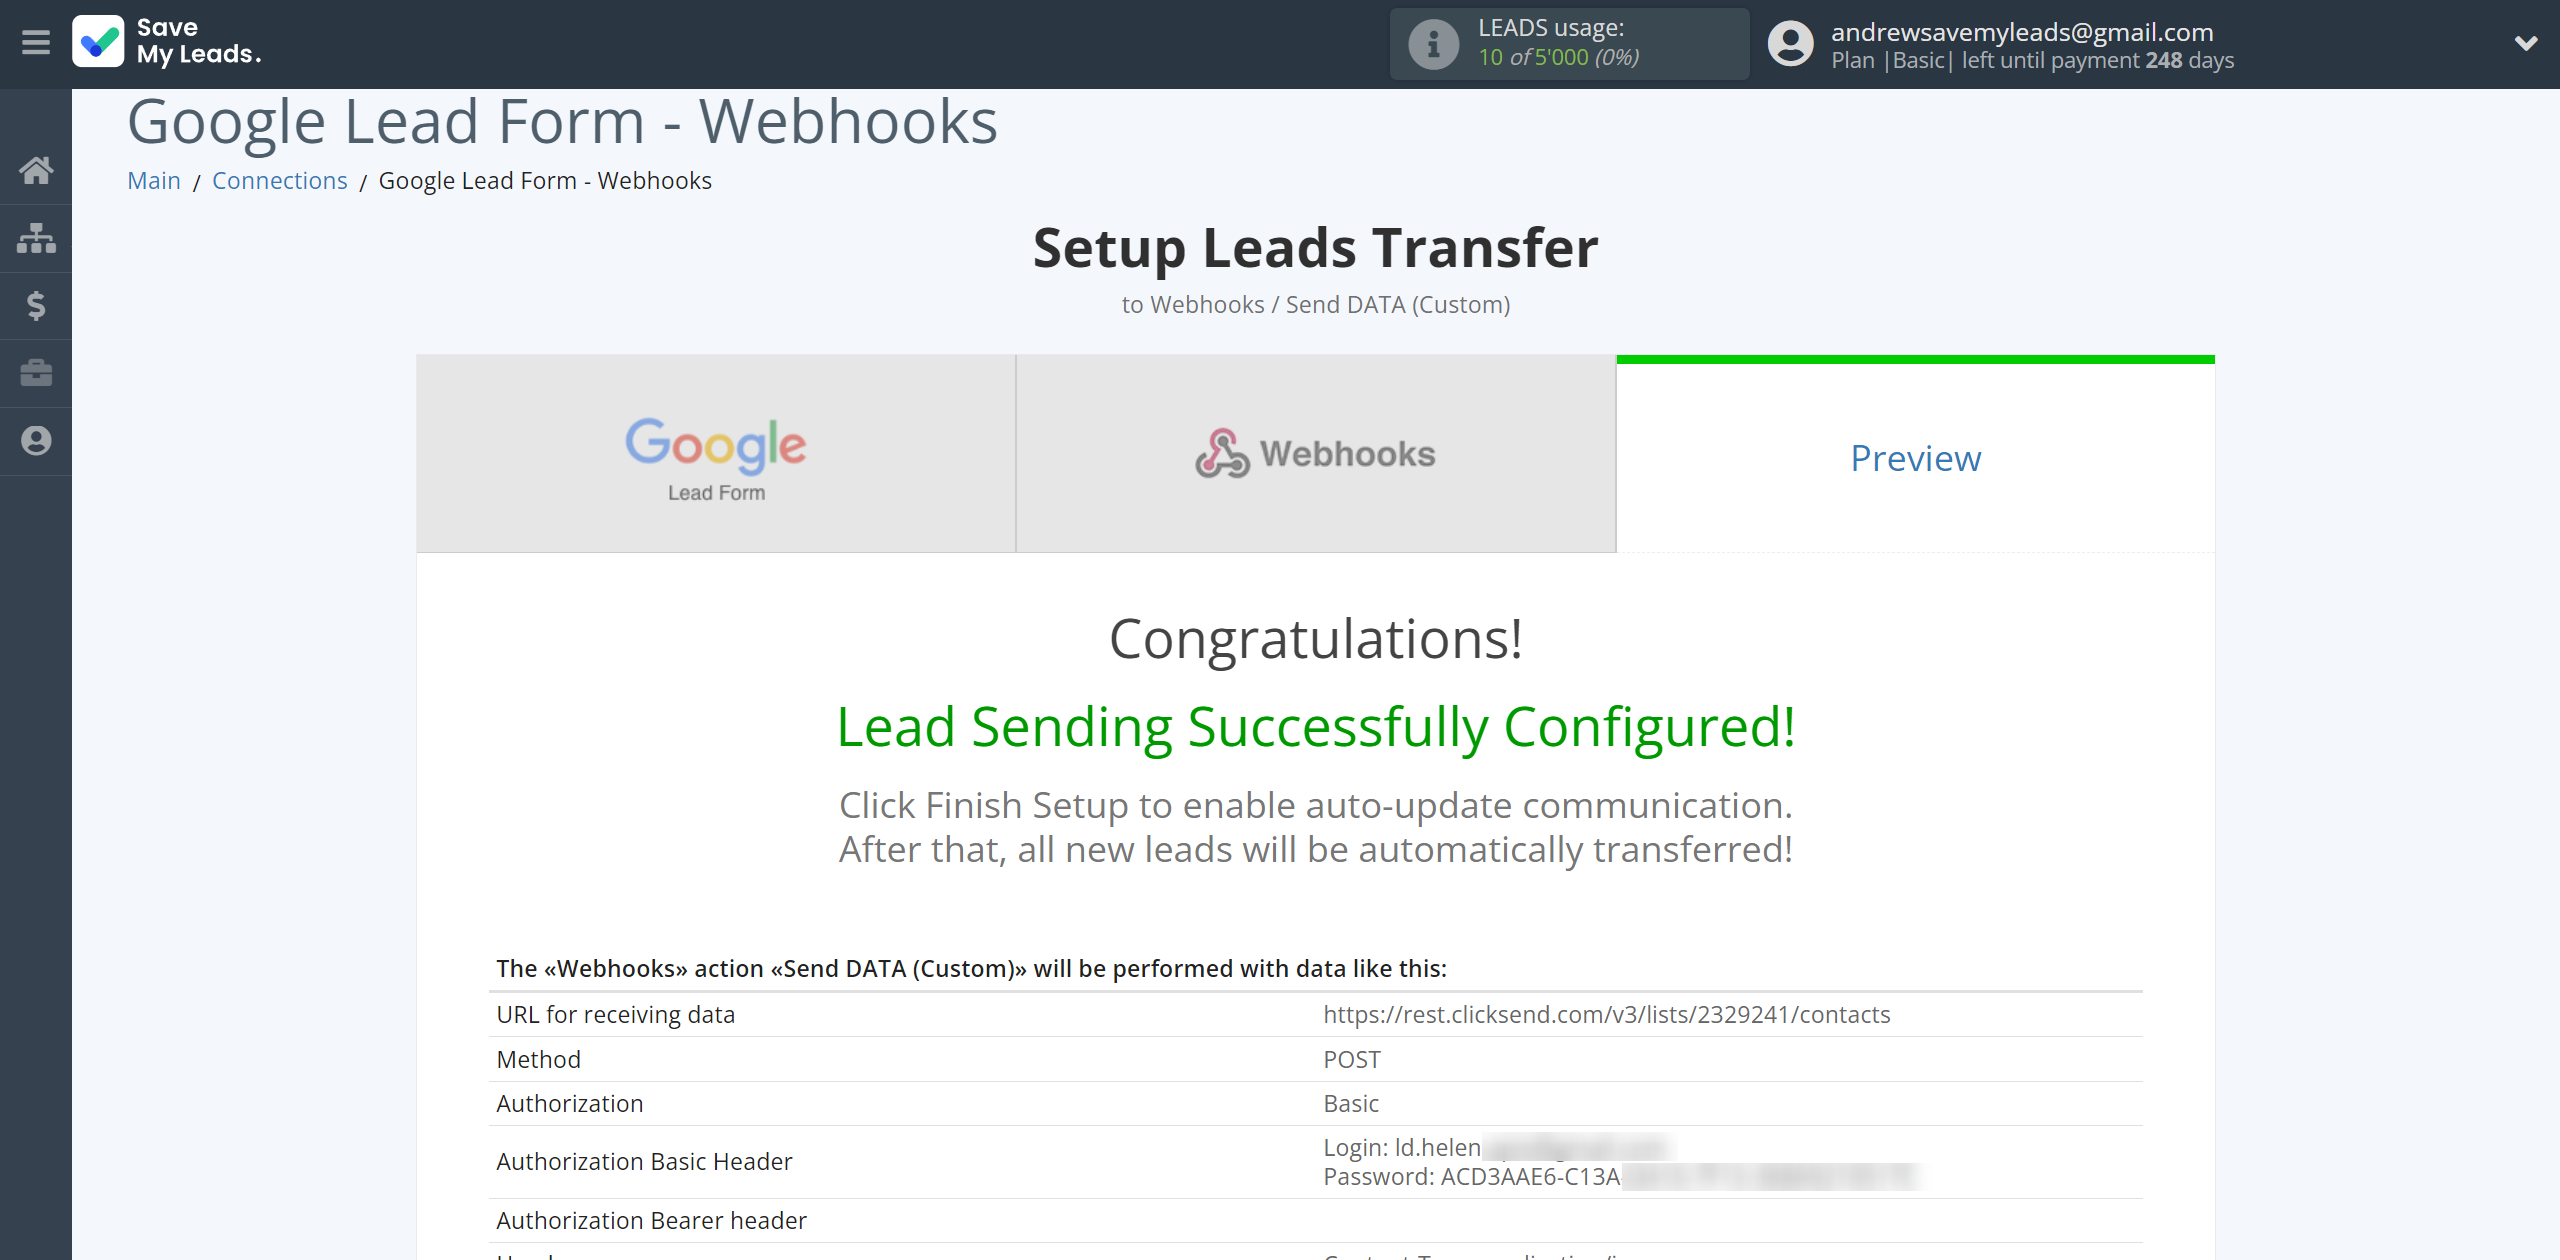 How to Connect Google Lead Form with Webhooks (Custom) | Test data